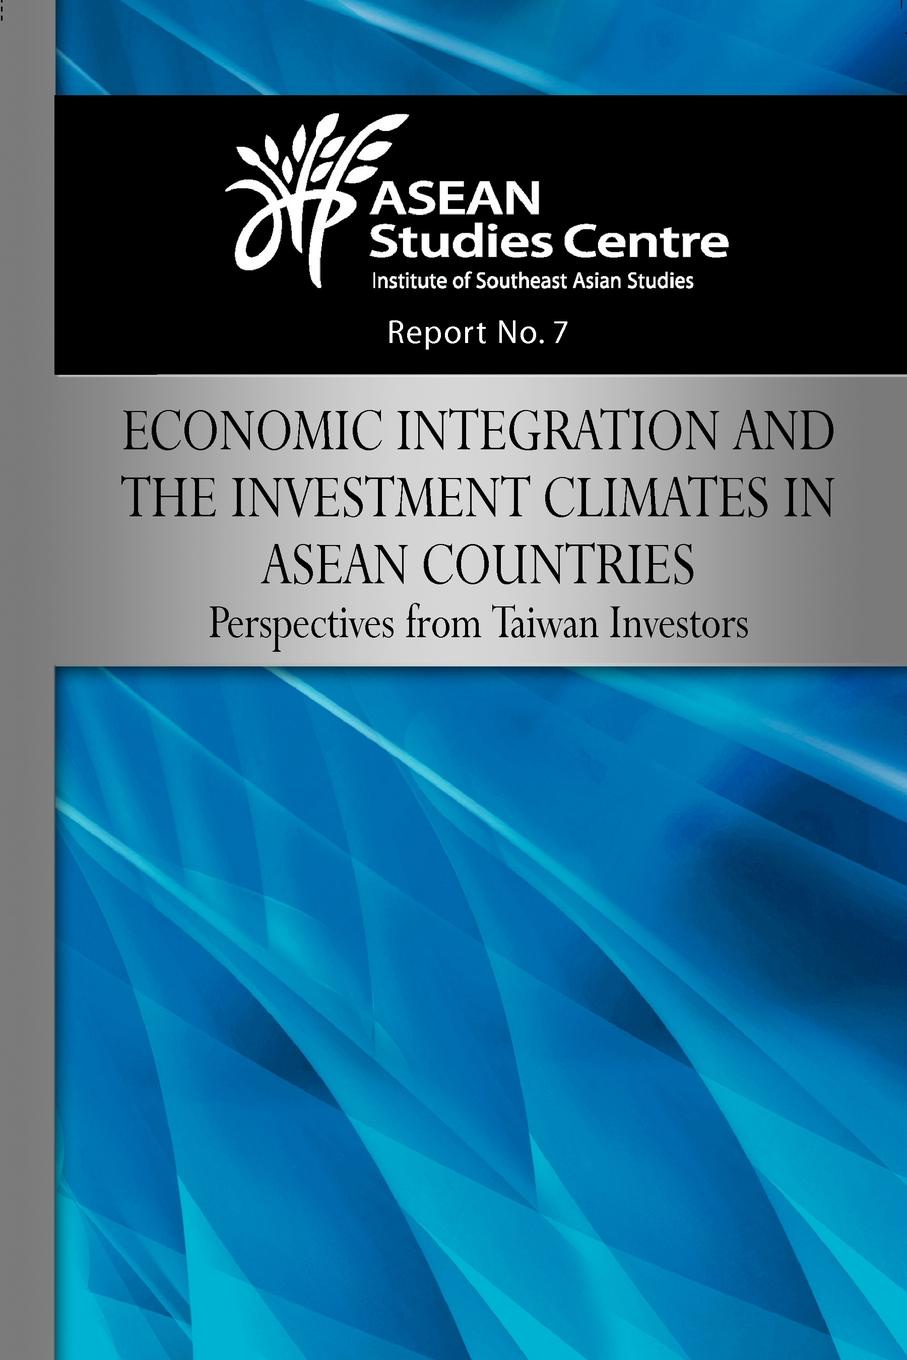 Economic Integration and the Investment Climates in ASEAN Countries. Perspectives from Taiwan Investors